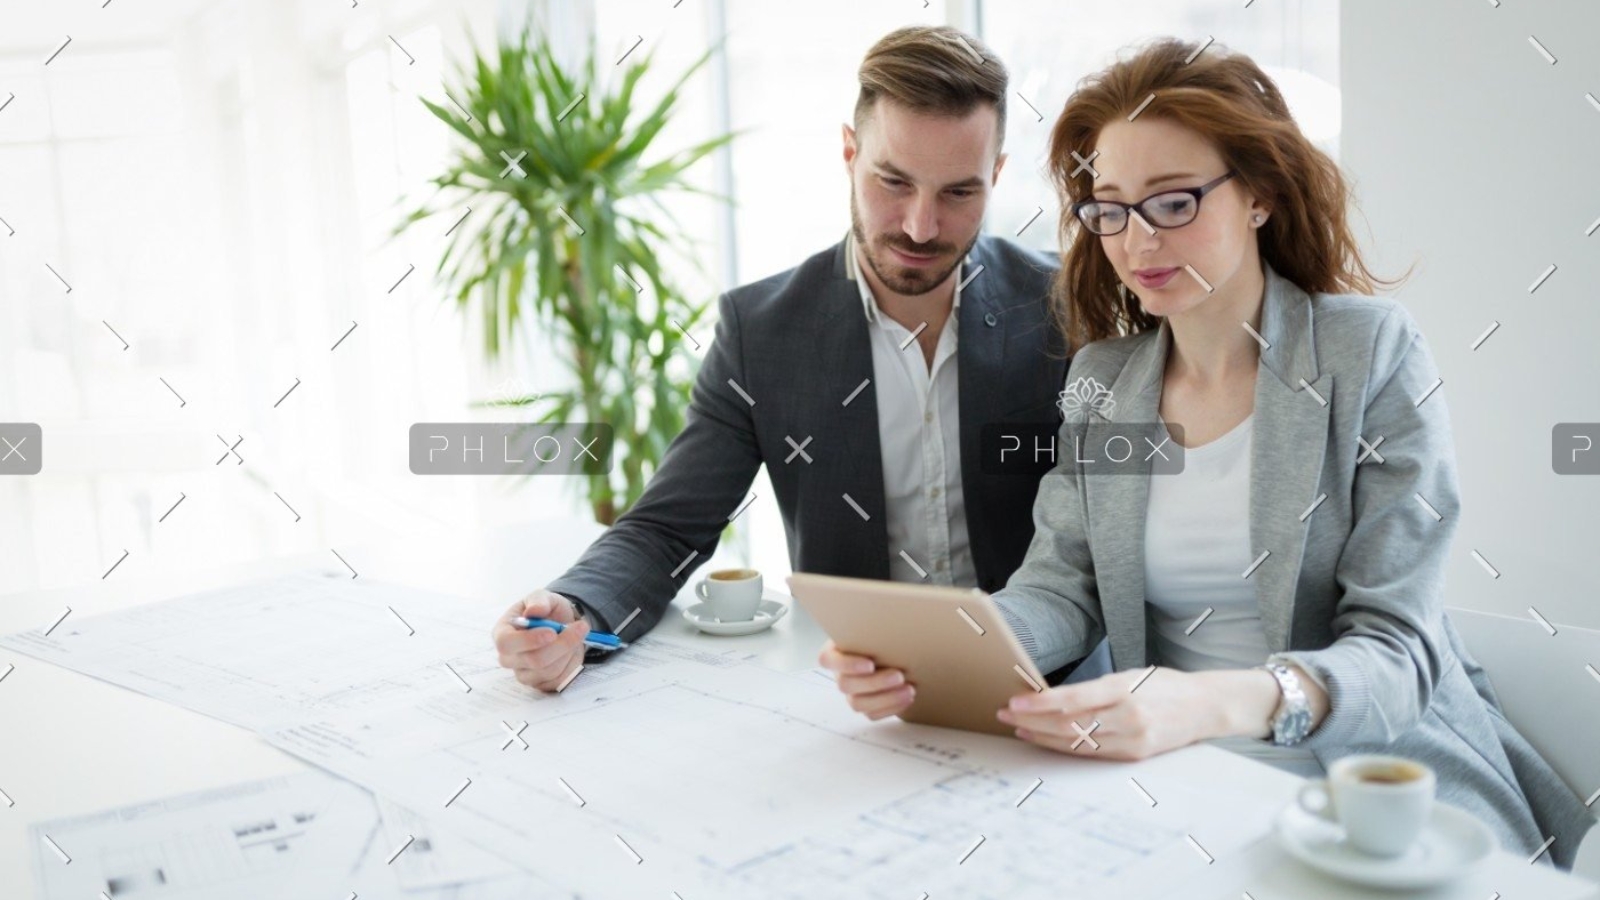 demo-attachment-877-portrait-of-young-architect-woman-on-meeting-KFZCE3A